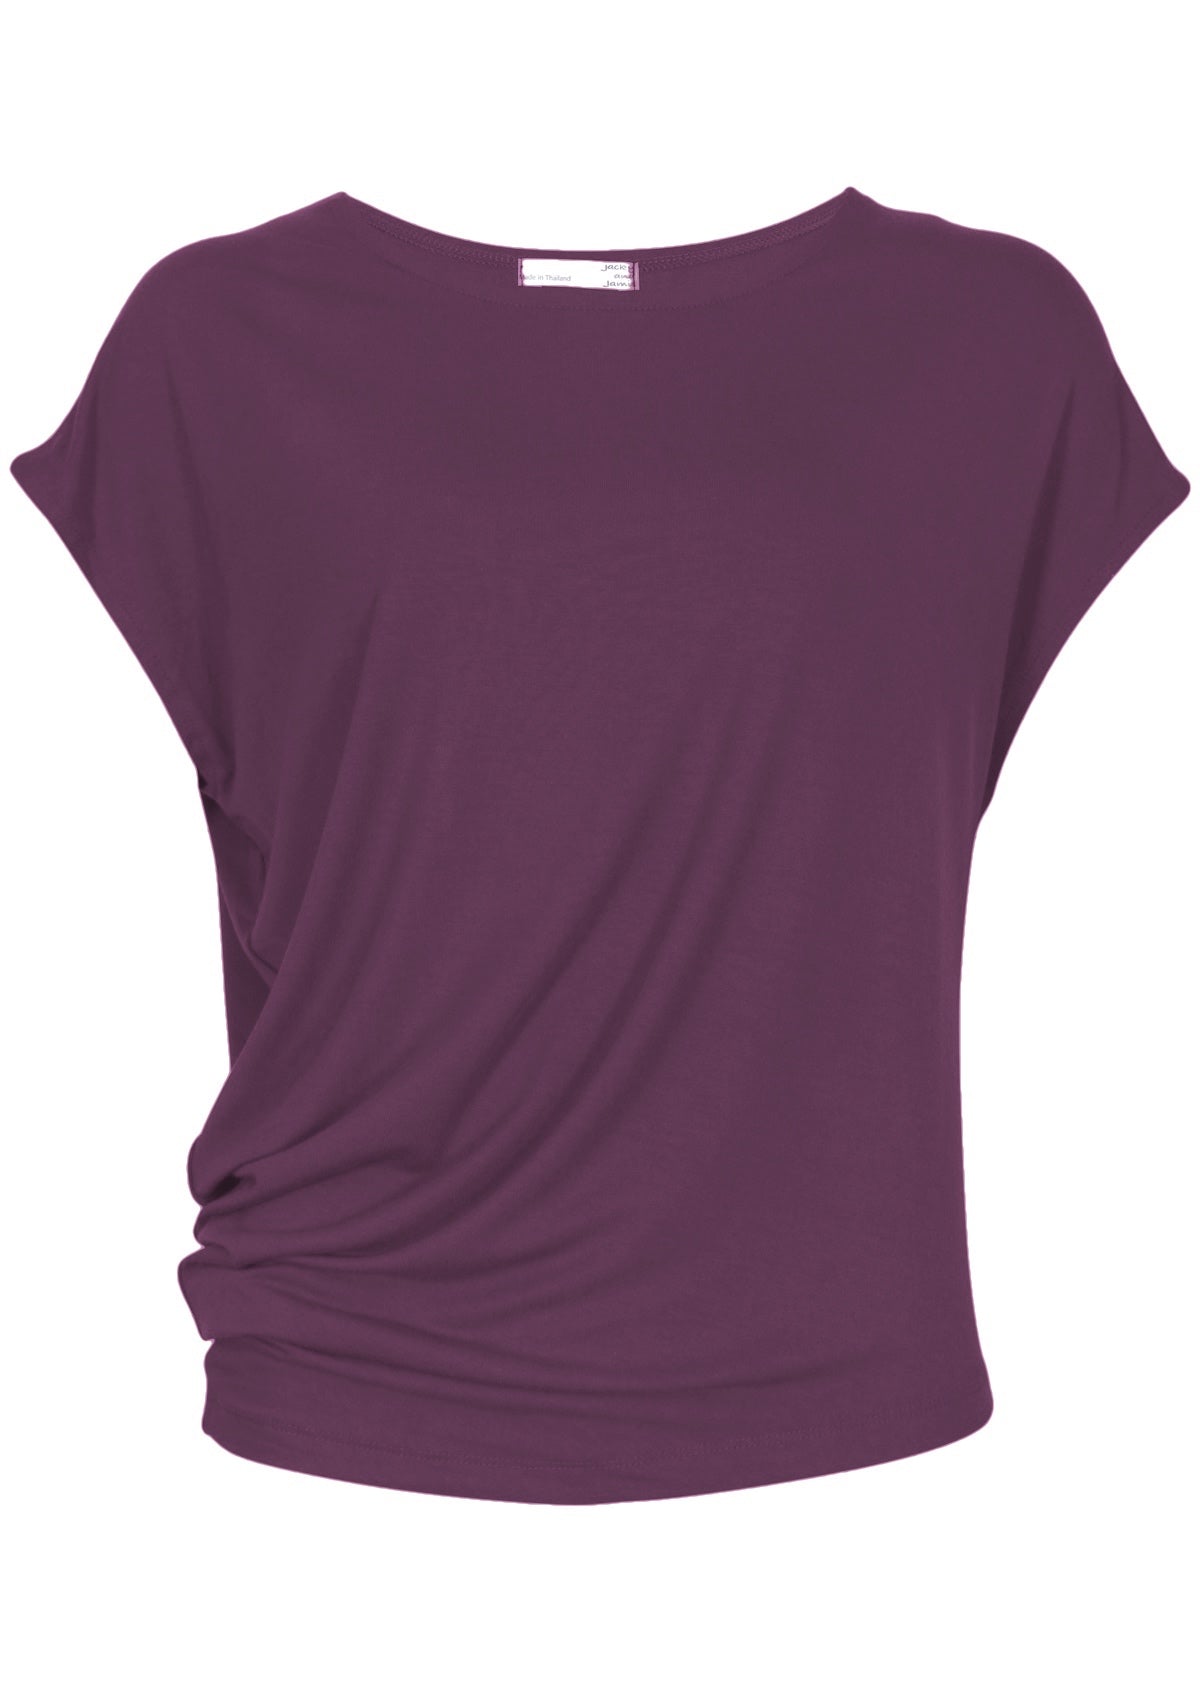 purple round neck asymmetrical side of top creating gathering